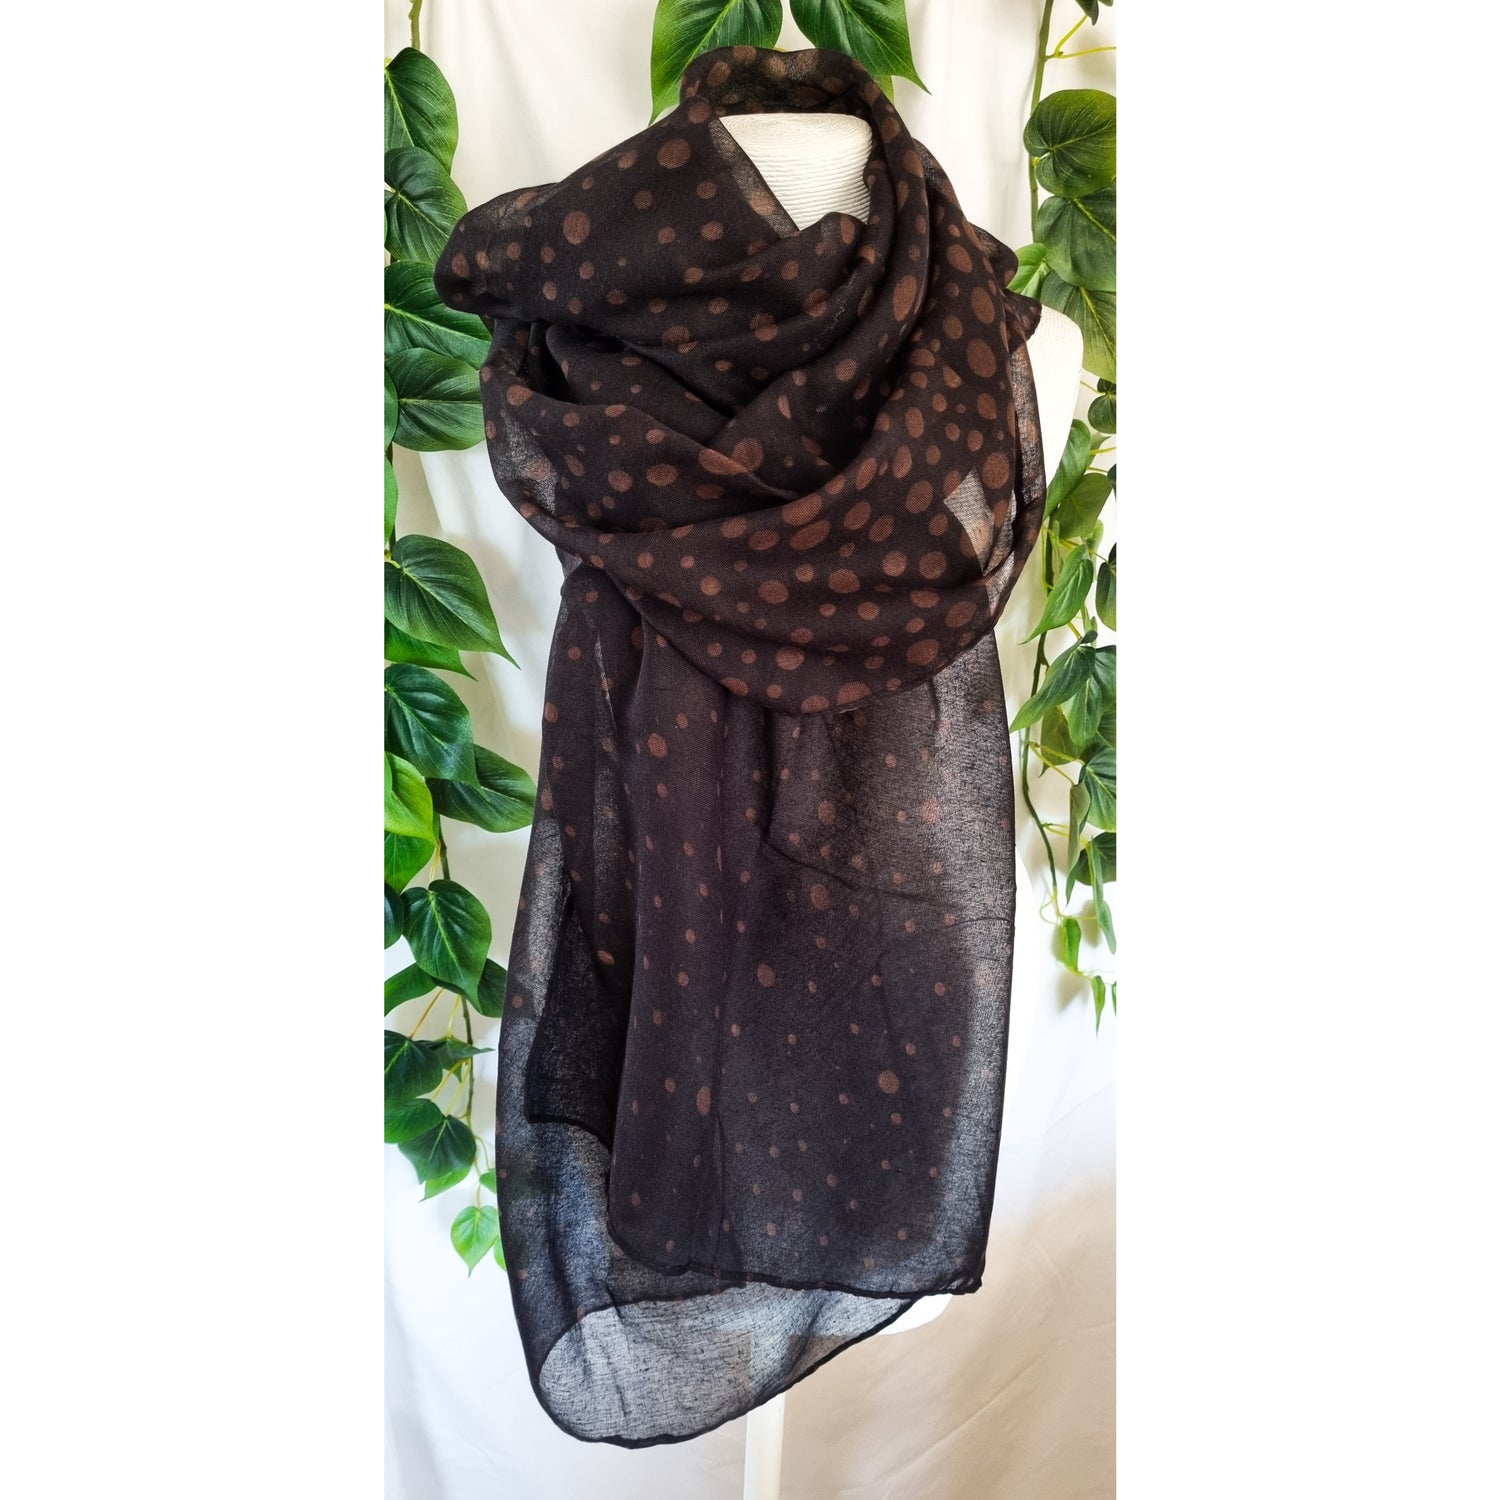 Viscose Scarf - Spots Black and Chocolate